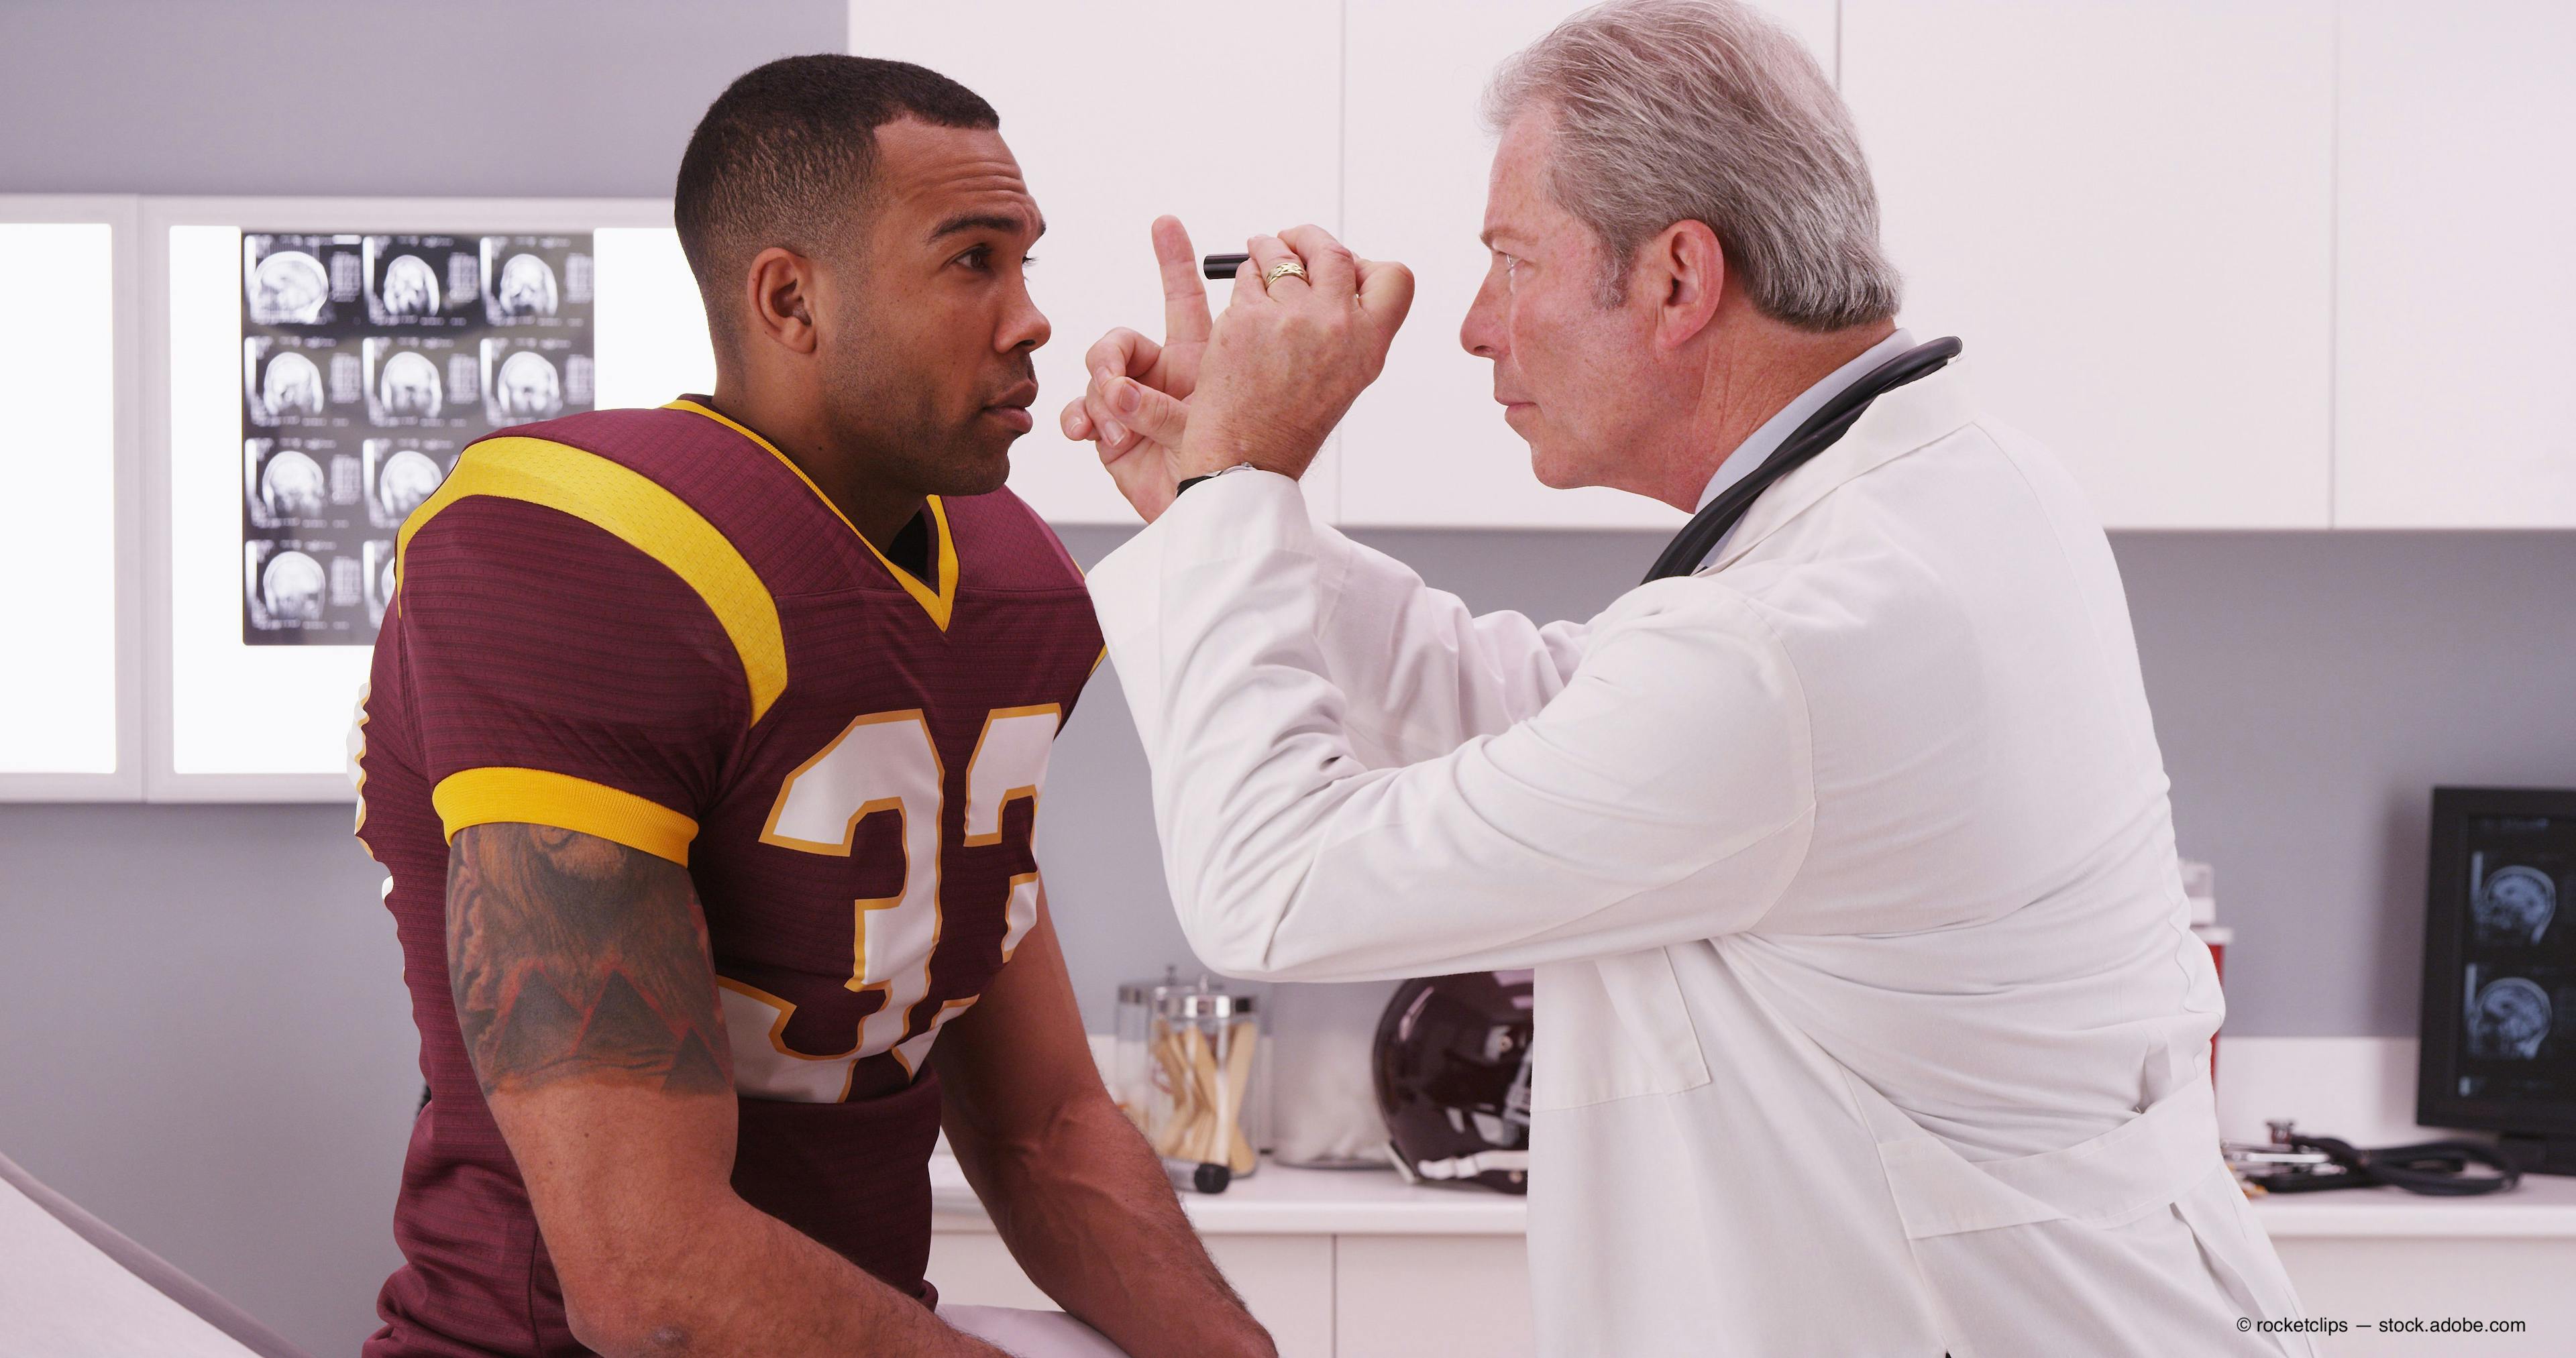 Athletes and doctors: not that different